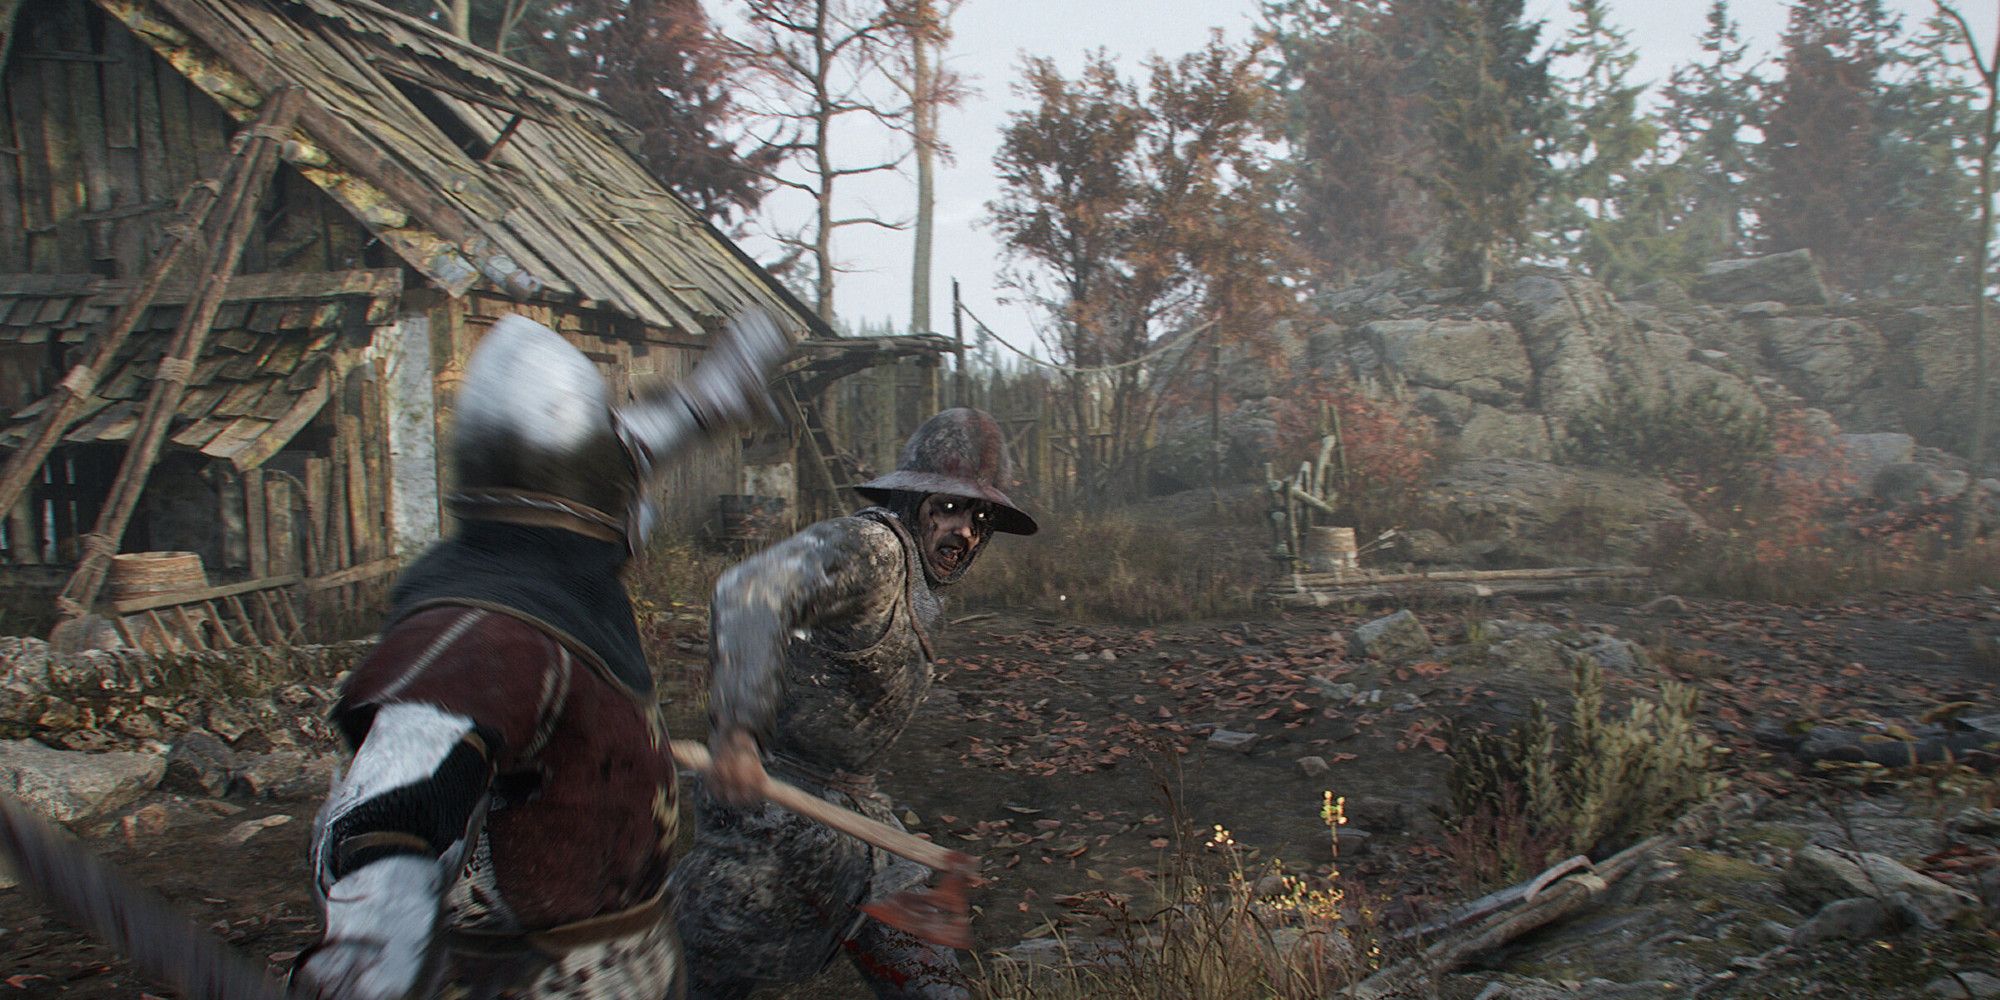 An armored knight fighting an axe-wielding zombie in Blight: Survival